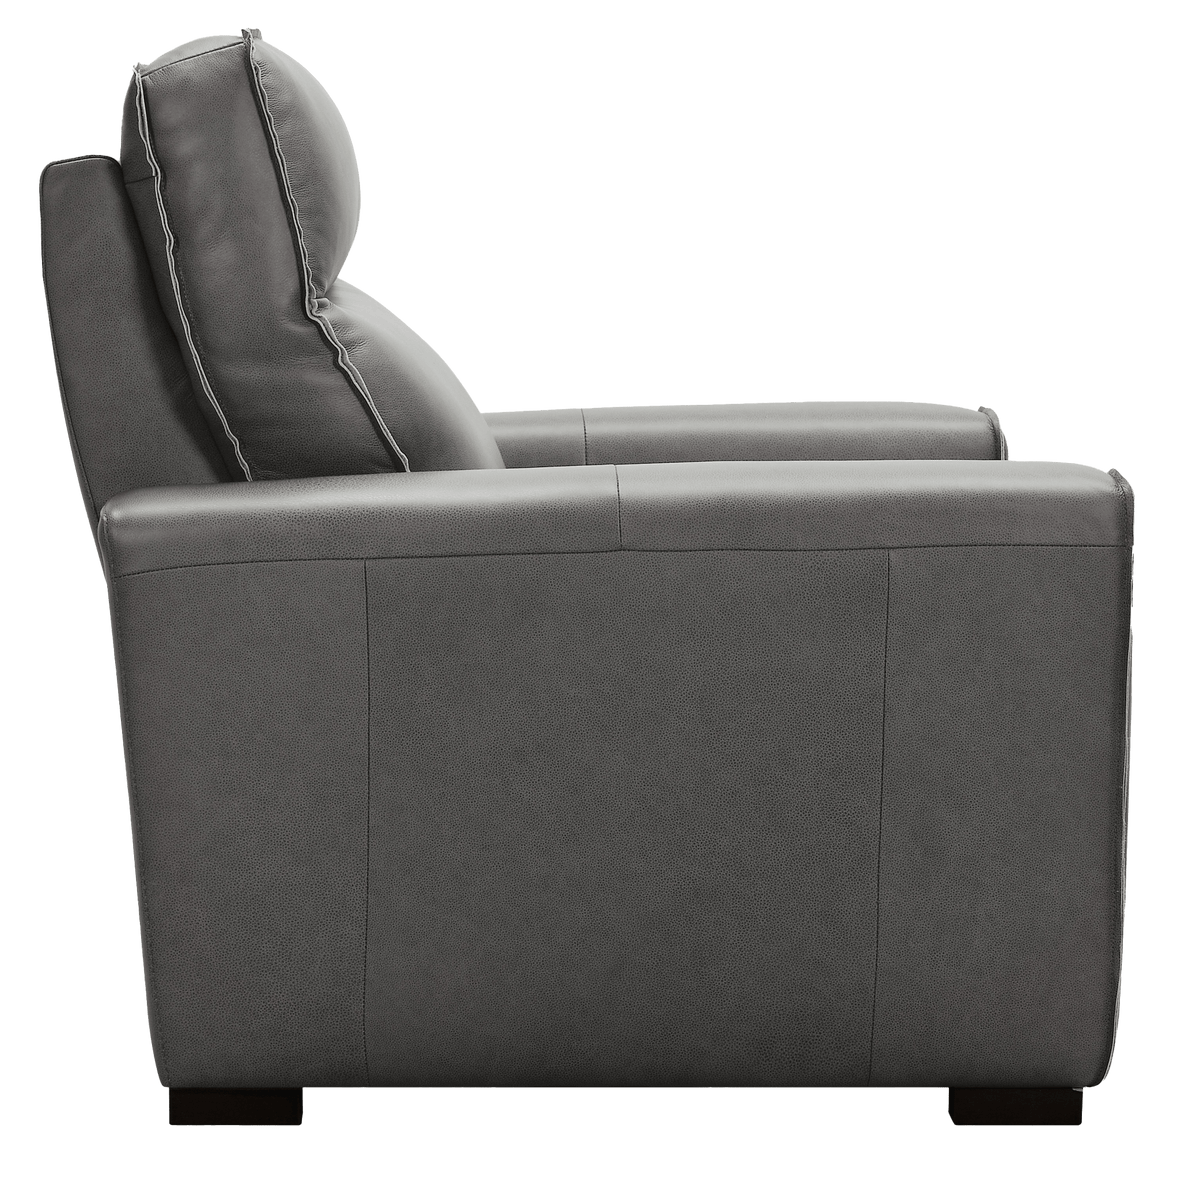 Baxlee Leather Power Recliner with Articulating Headrest, Leather, Gray - Coja